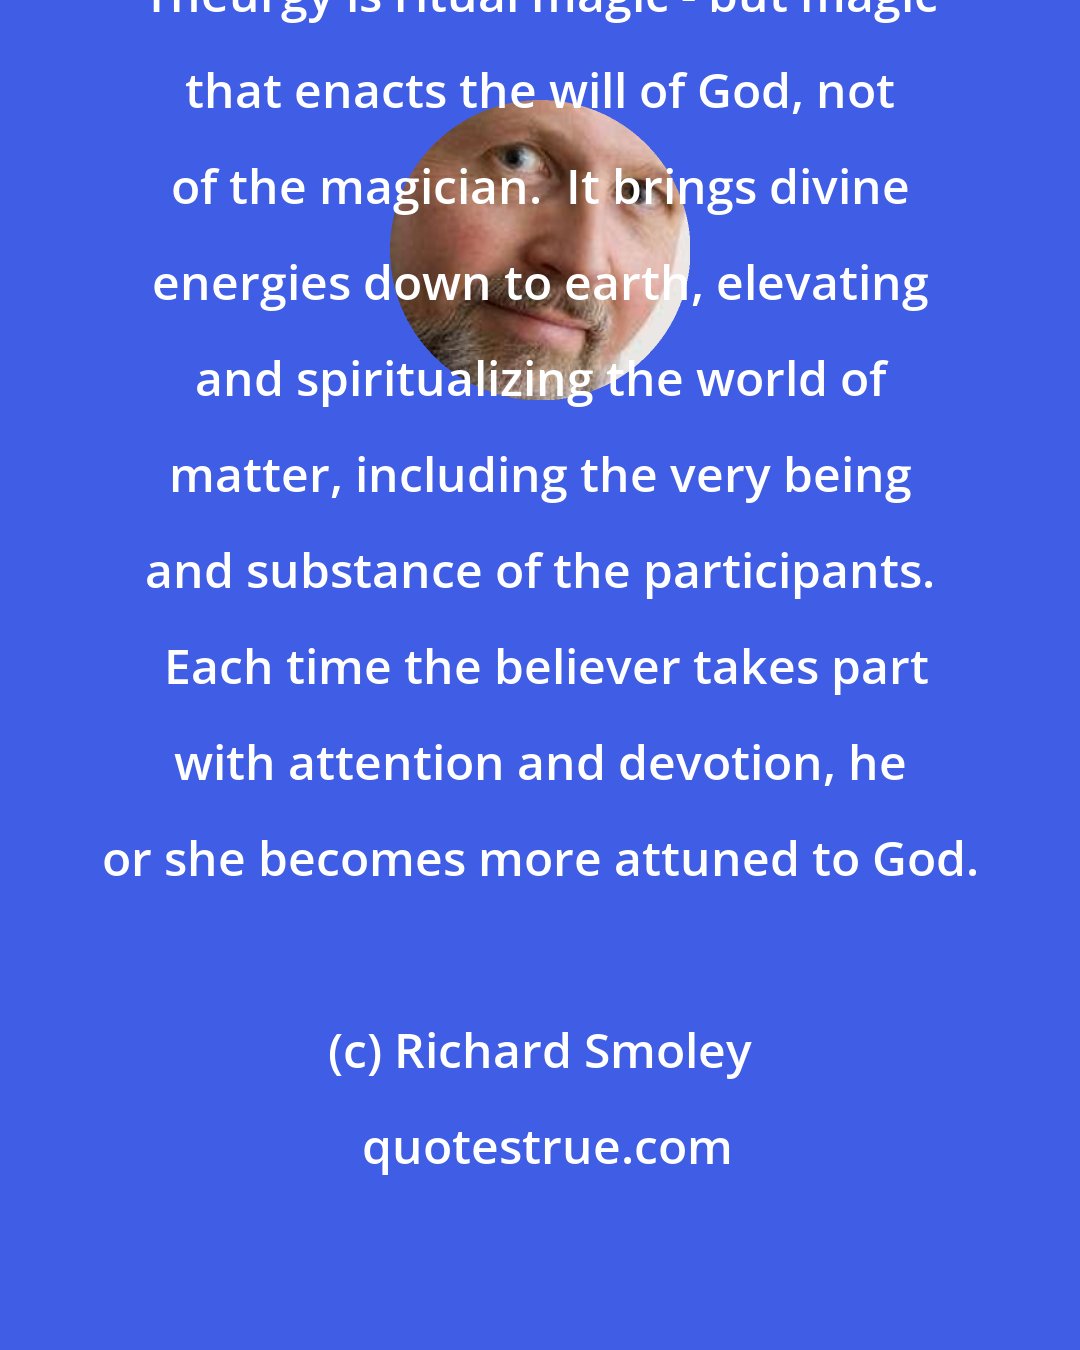 Richard Smoley: Theurgy is ritual magic - but magic that enacts the will of God, not of the magician.  It brings divine energies down to earth, elevating and spiritualizing the world of matter, including the very being and substance of the participants.  Each time the believer takes part with attention and devotion, he or she becomes more attuned to God.